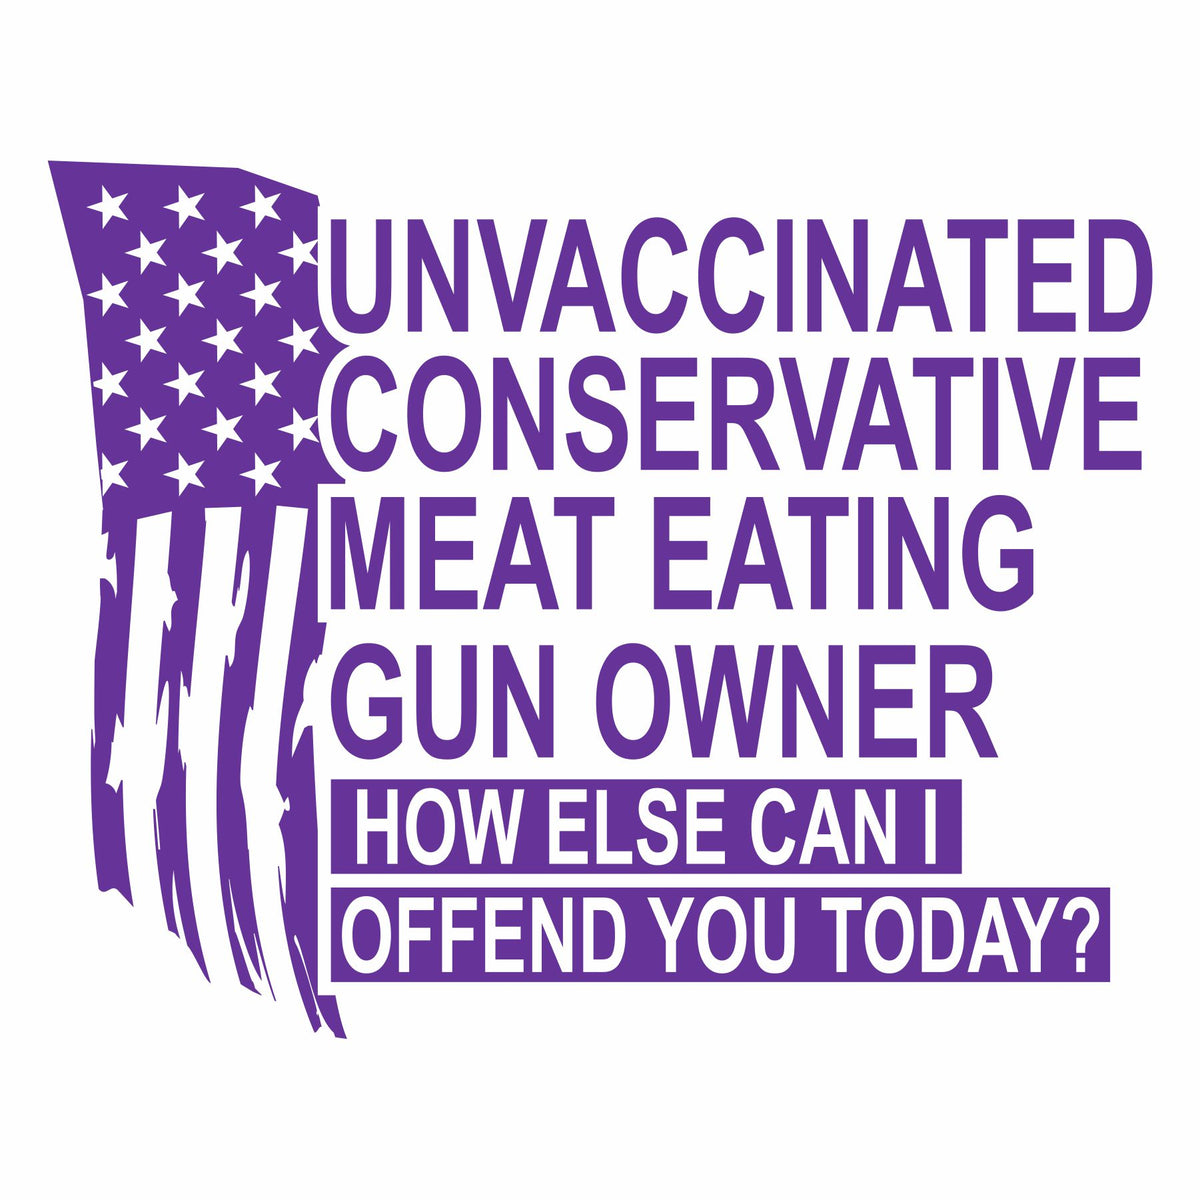 Unvaccinated - Conservative - Offend You Today - Vinyl - Free Shipping - Install Video in Description